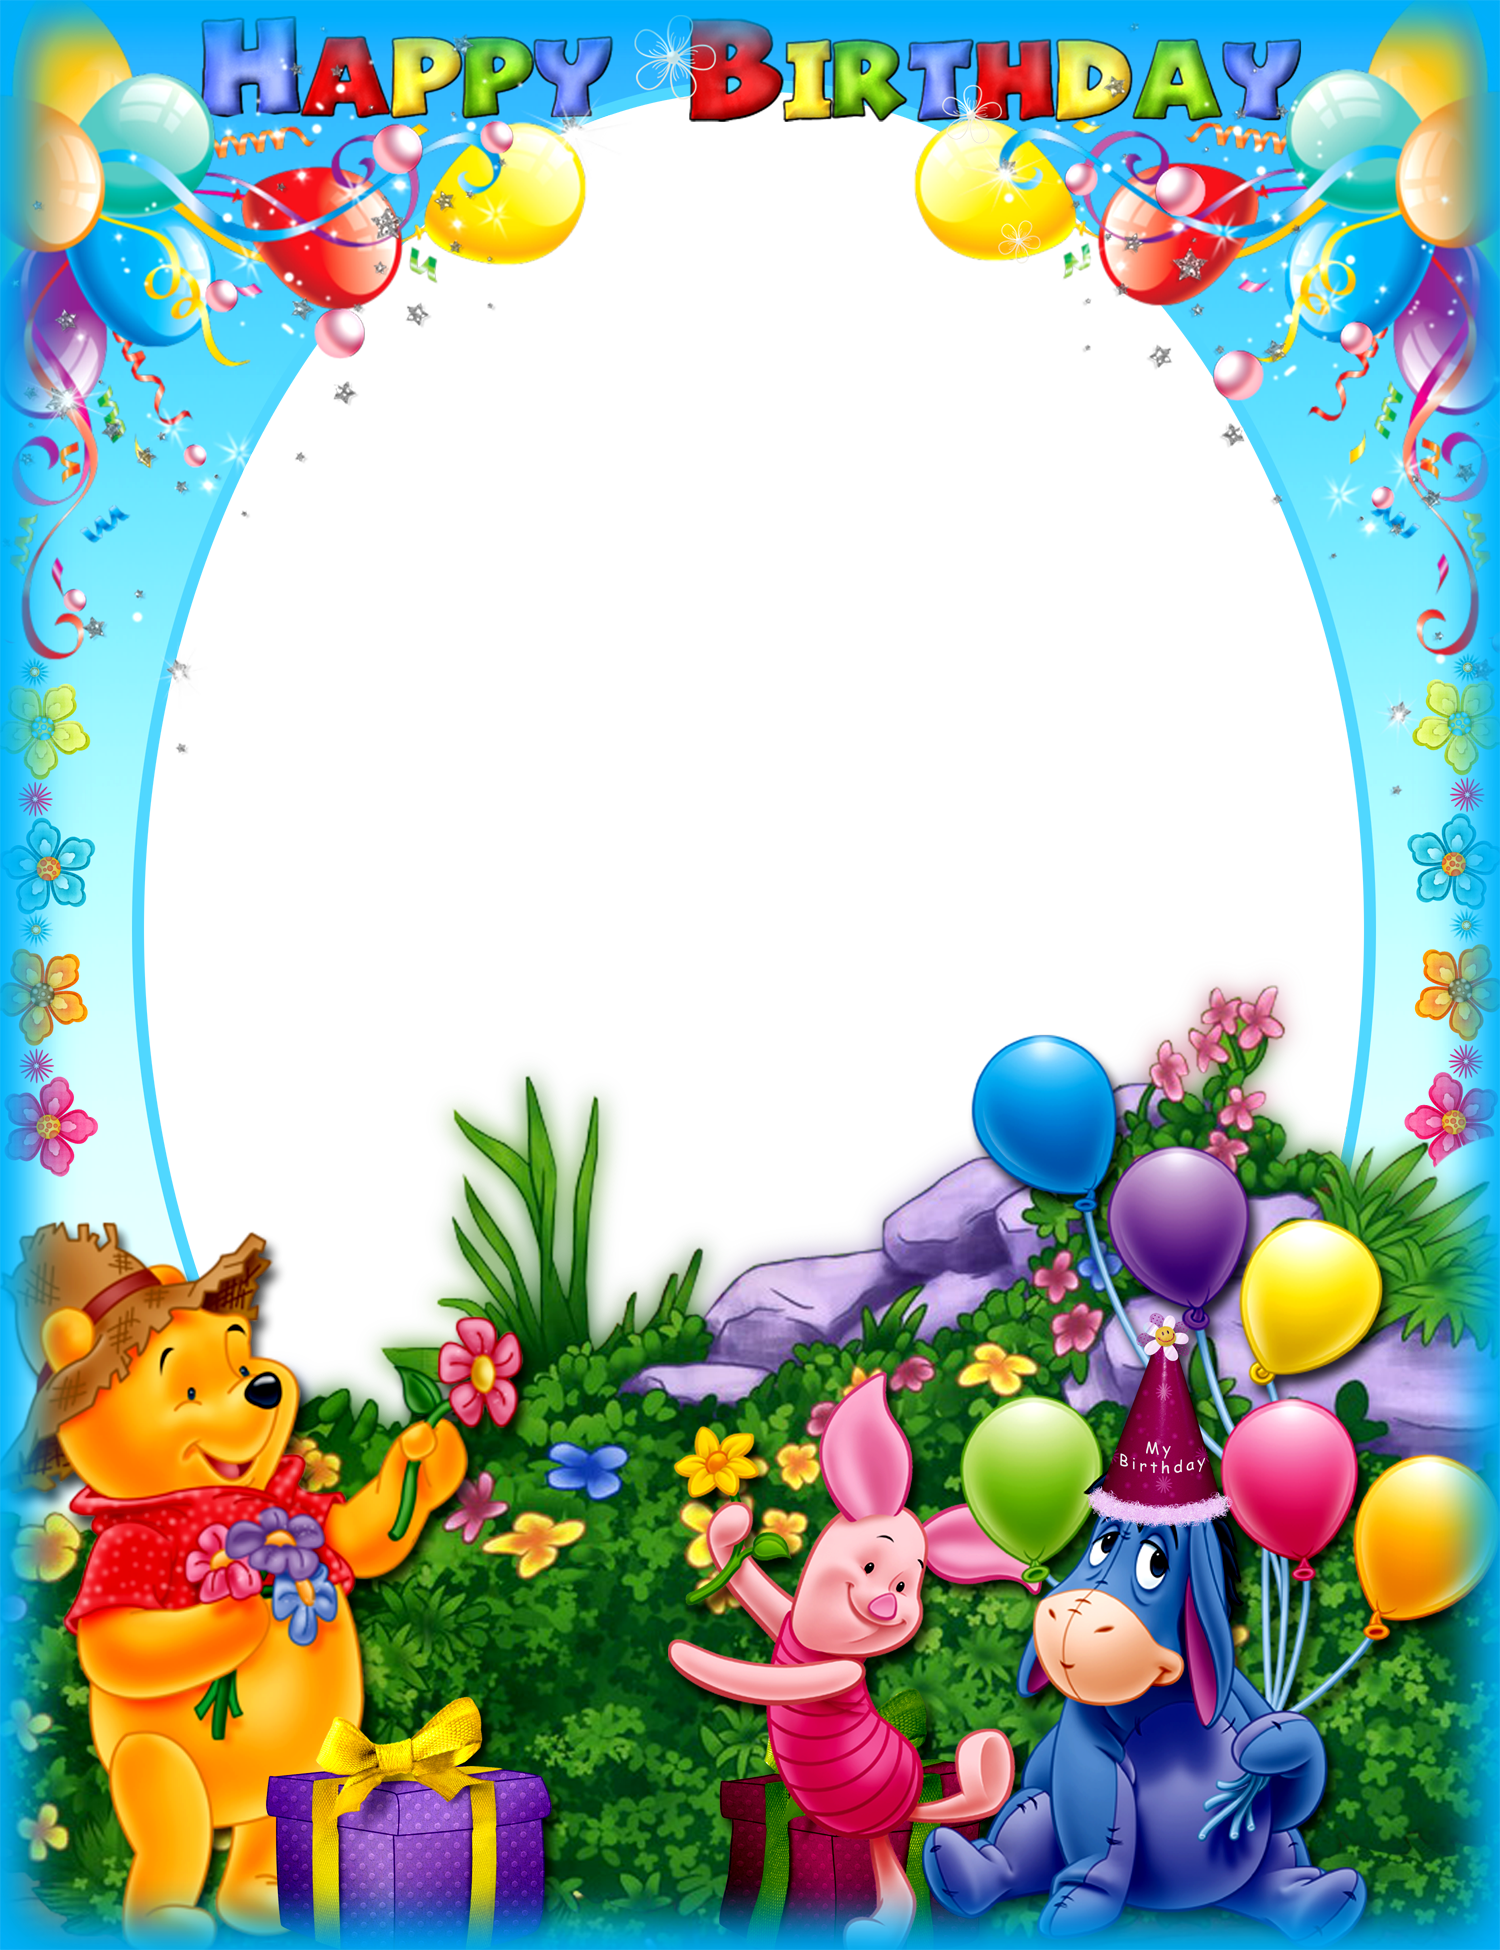 Party Birthday Frame Free PNG Image